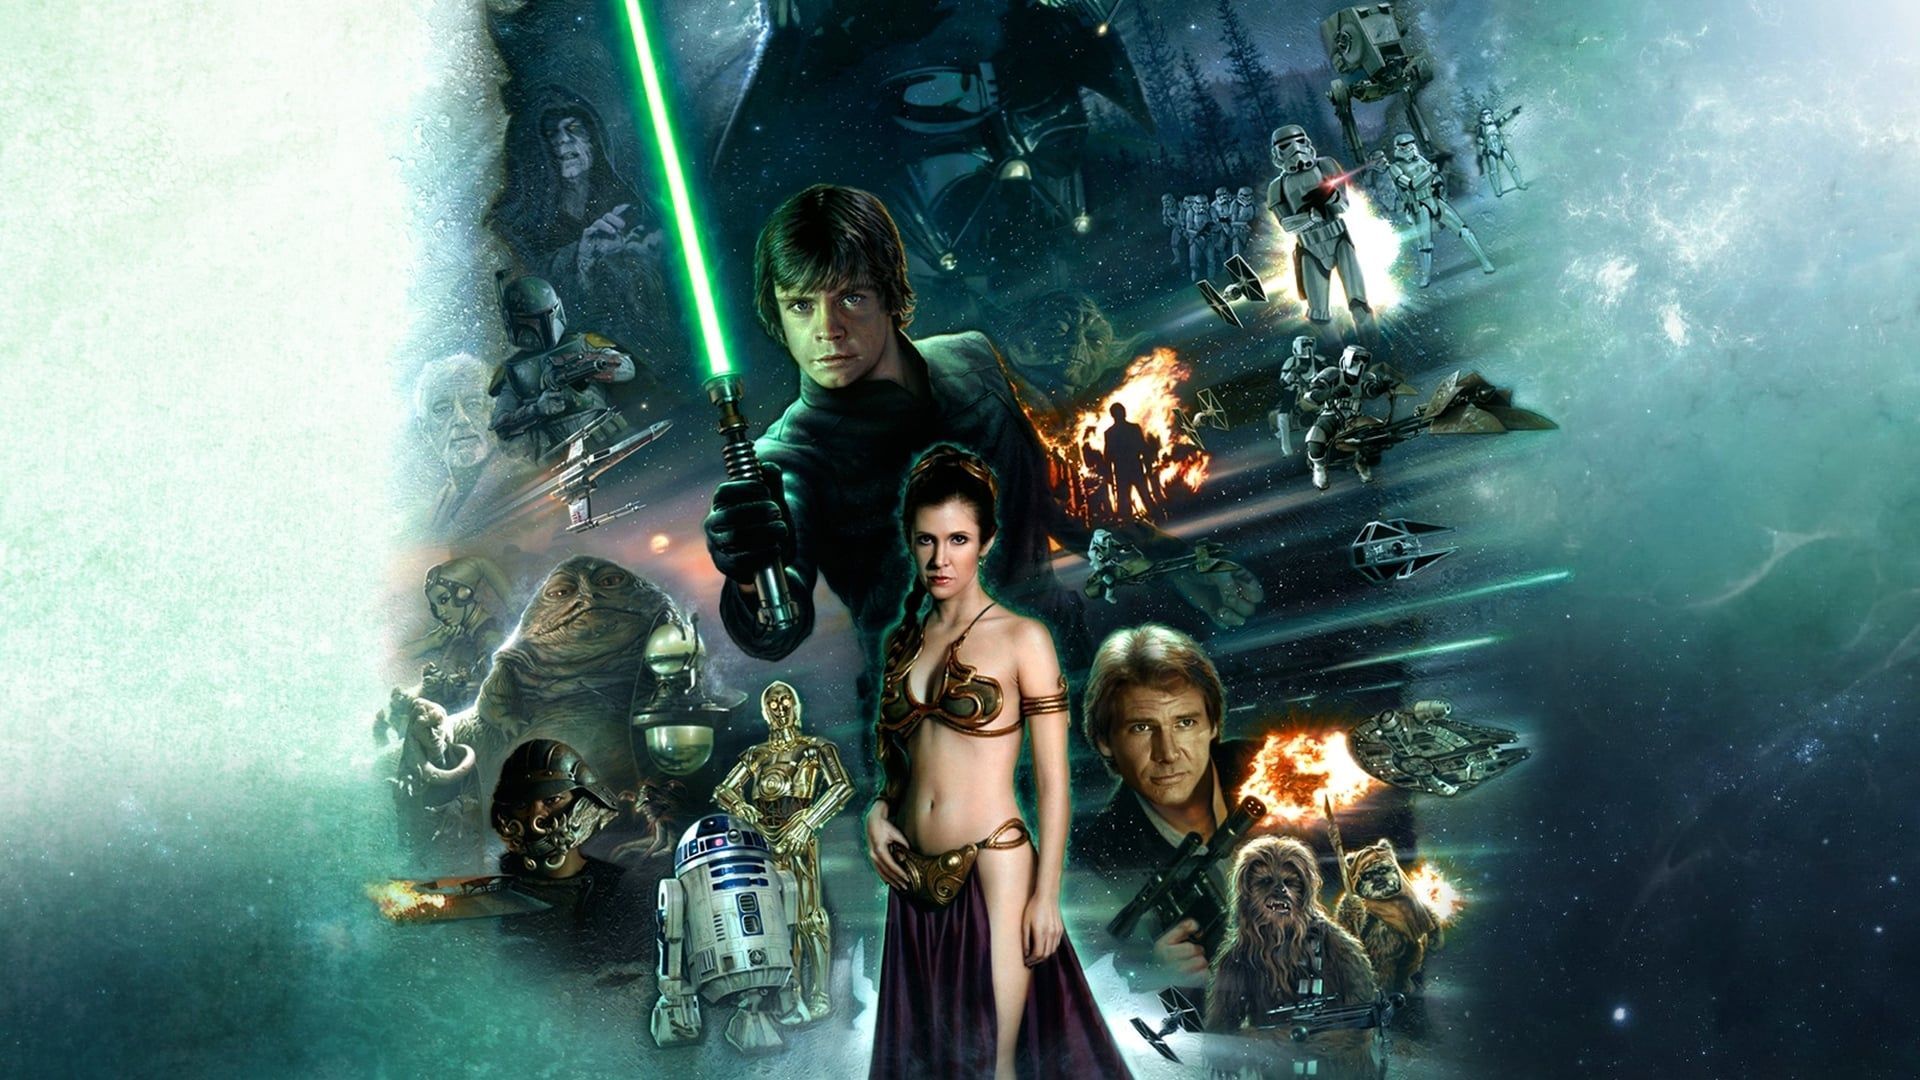 Return of the Jedi Wallpapers.